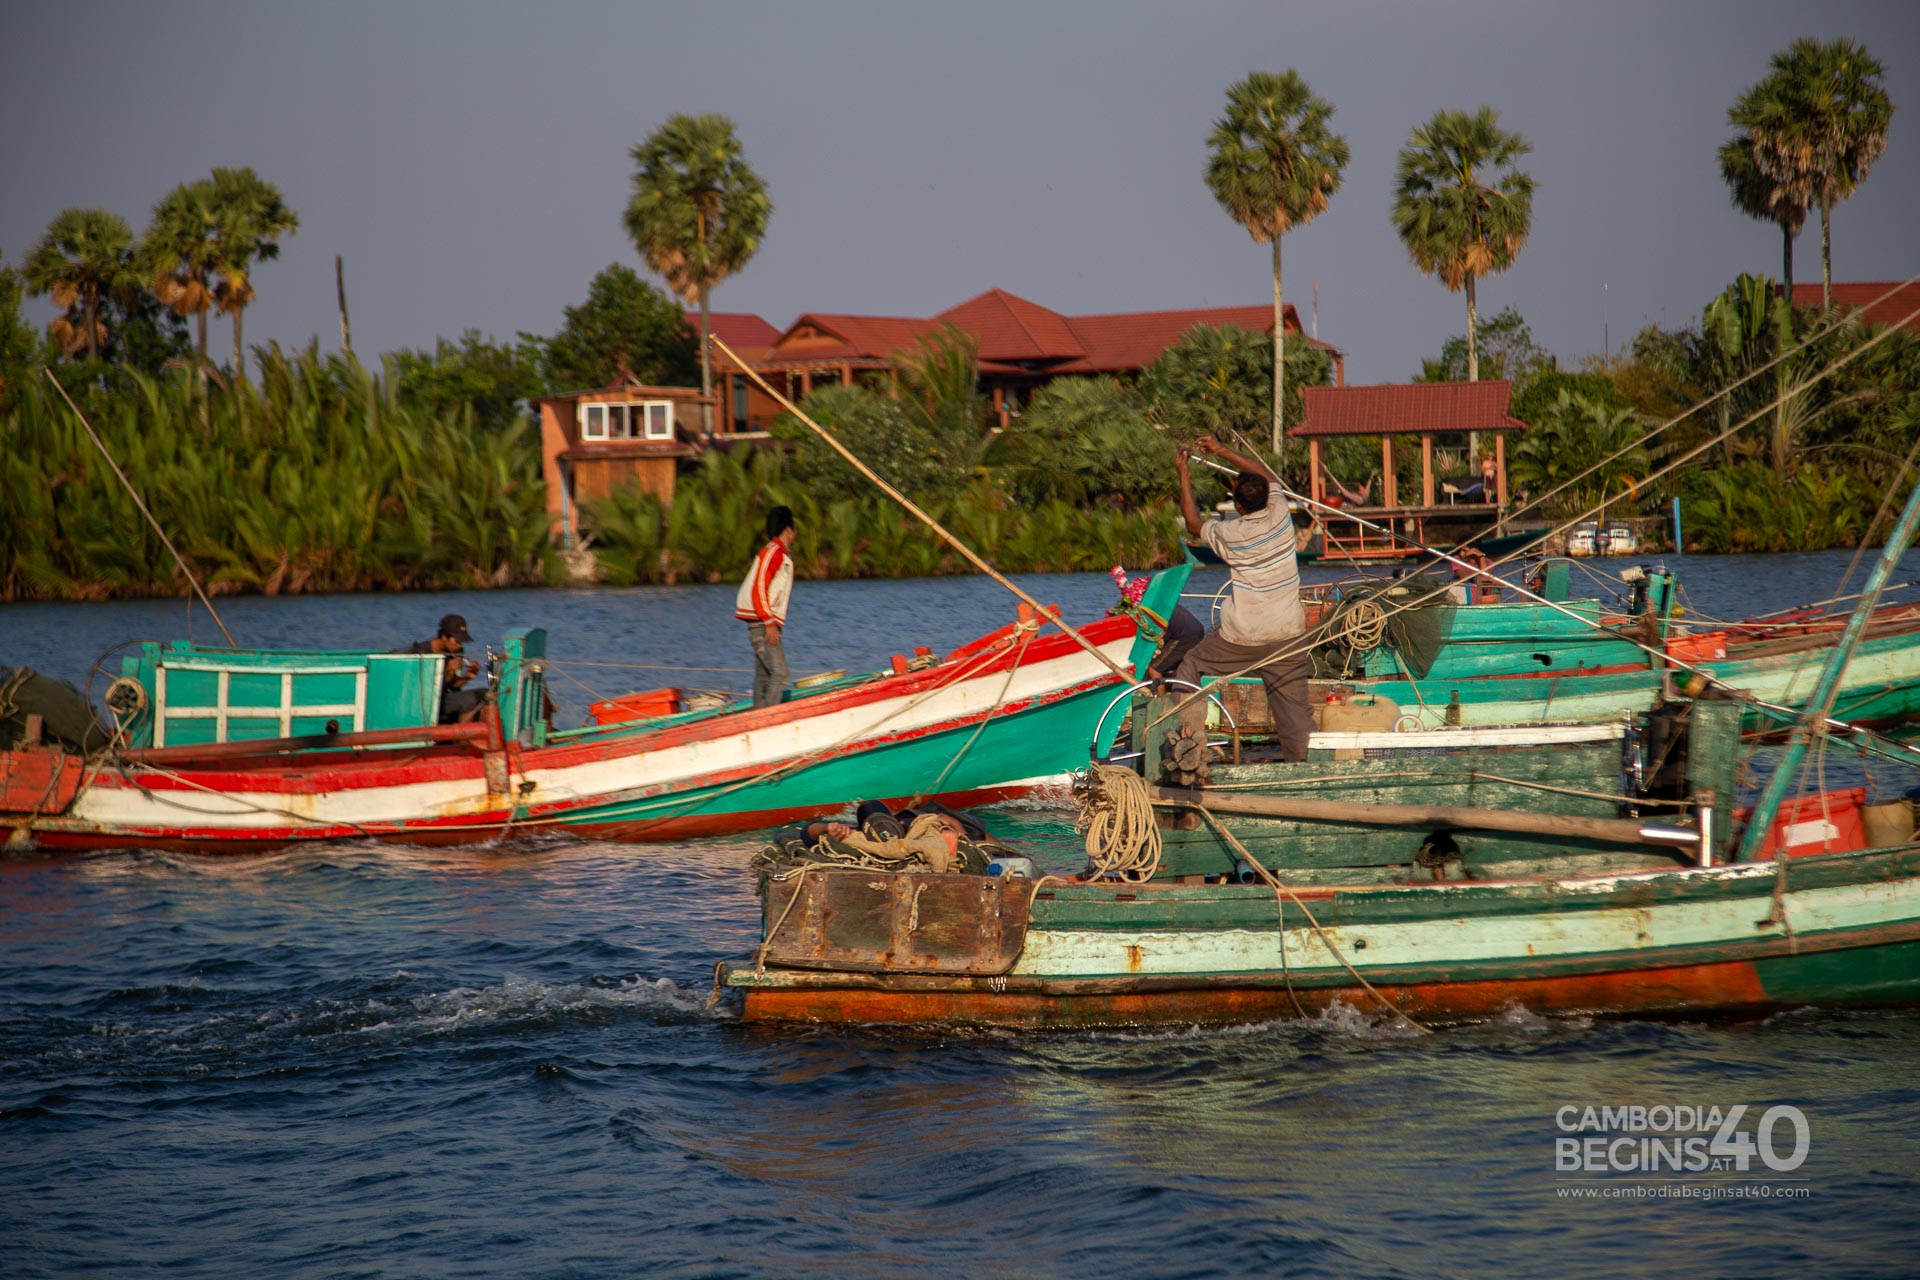 Kampot is one of the most popular of the weekend breaks from Phnom Penh